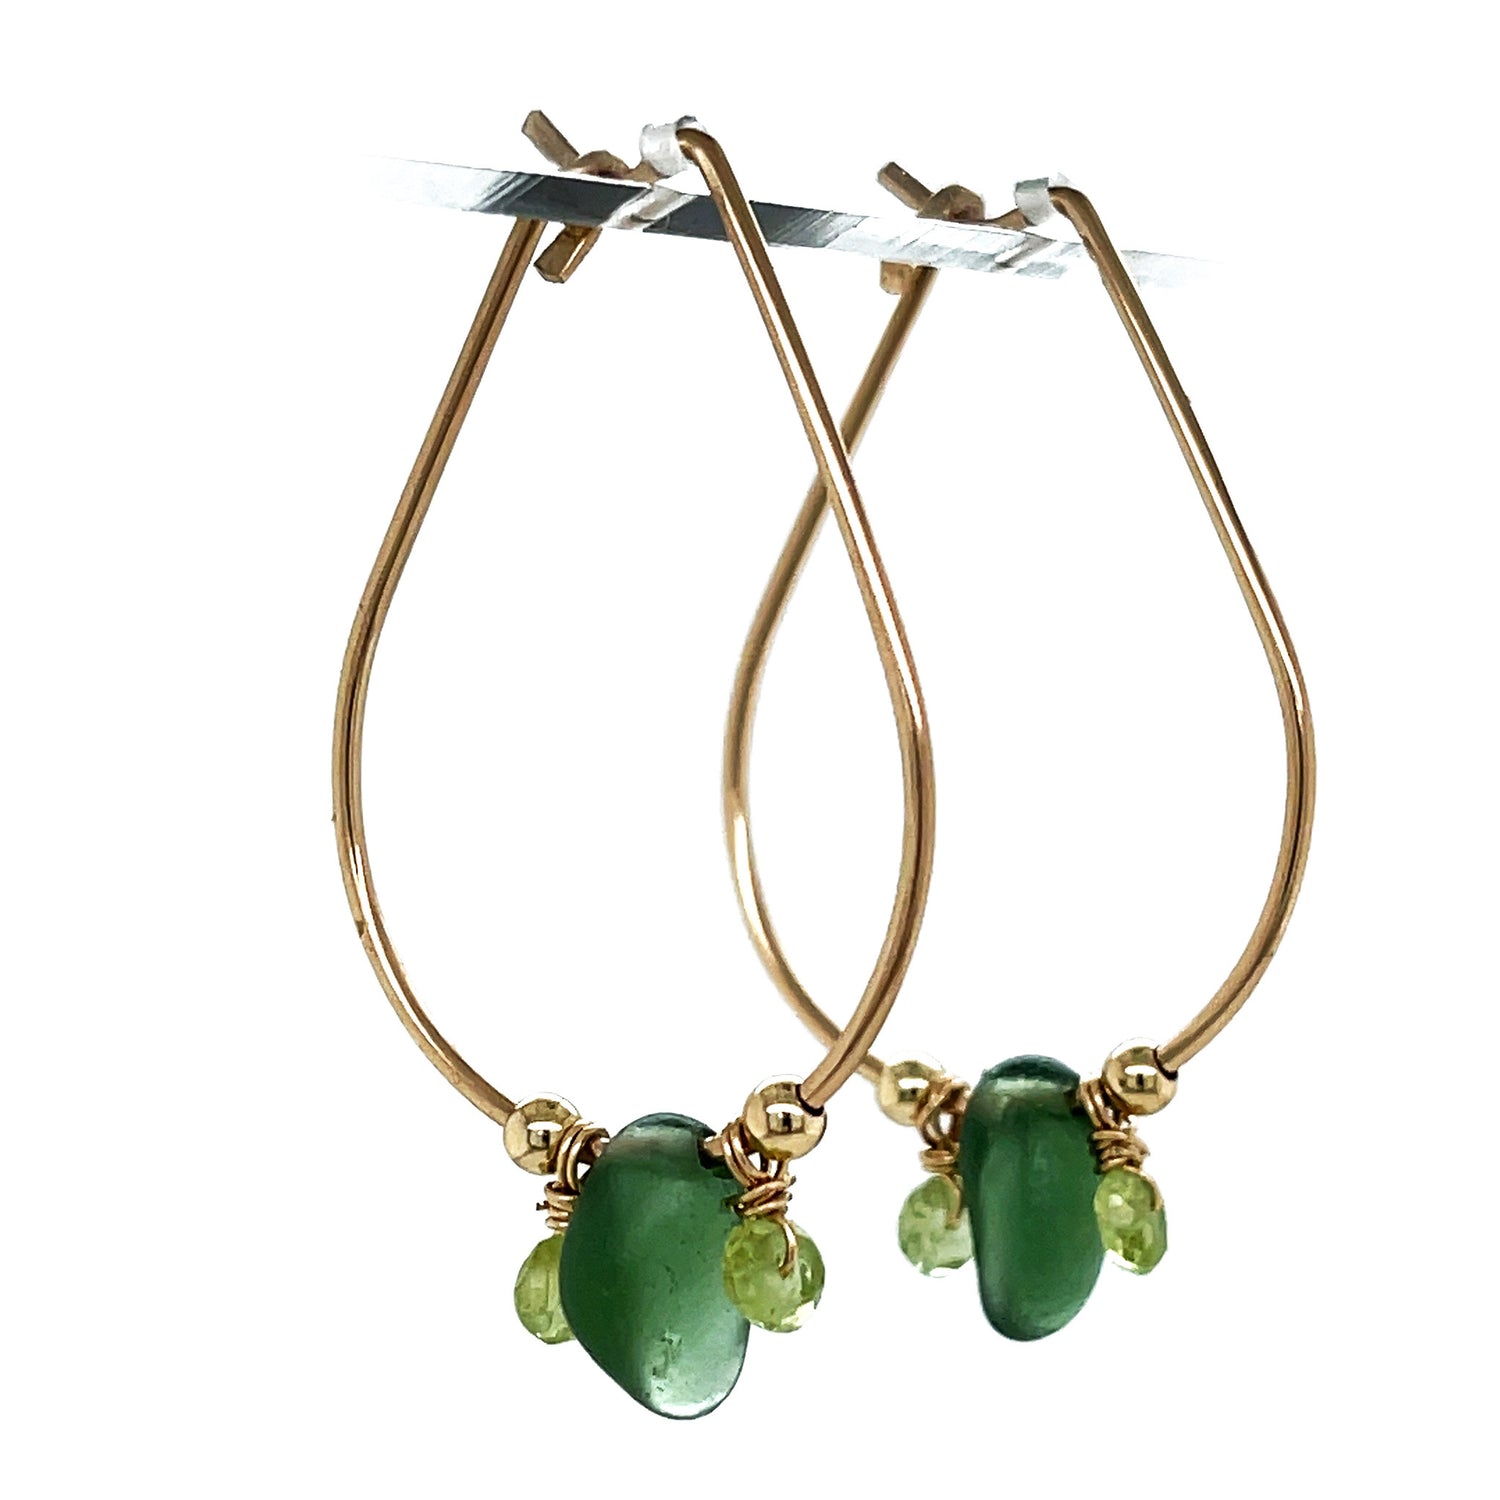 Everyday Gold Hoop Earrings with Green Sea Glass and Peridot Stones - Fashionable Hoops